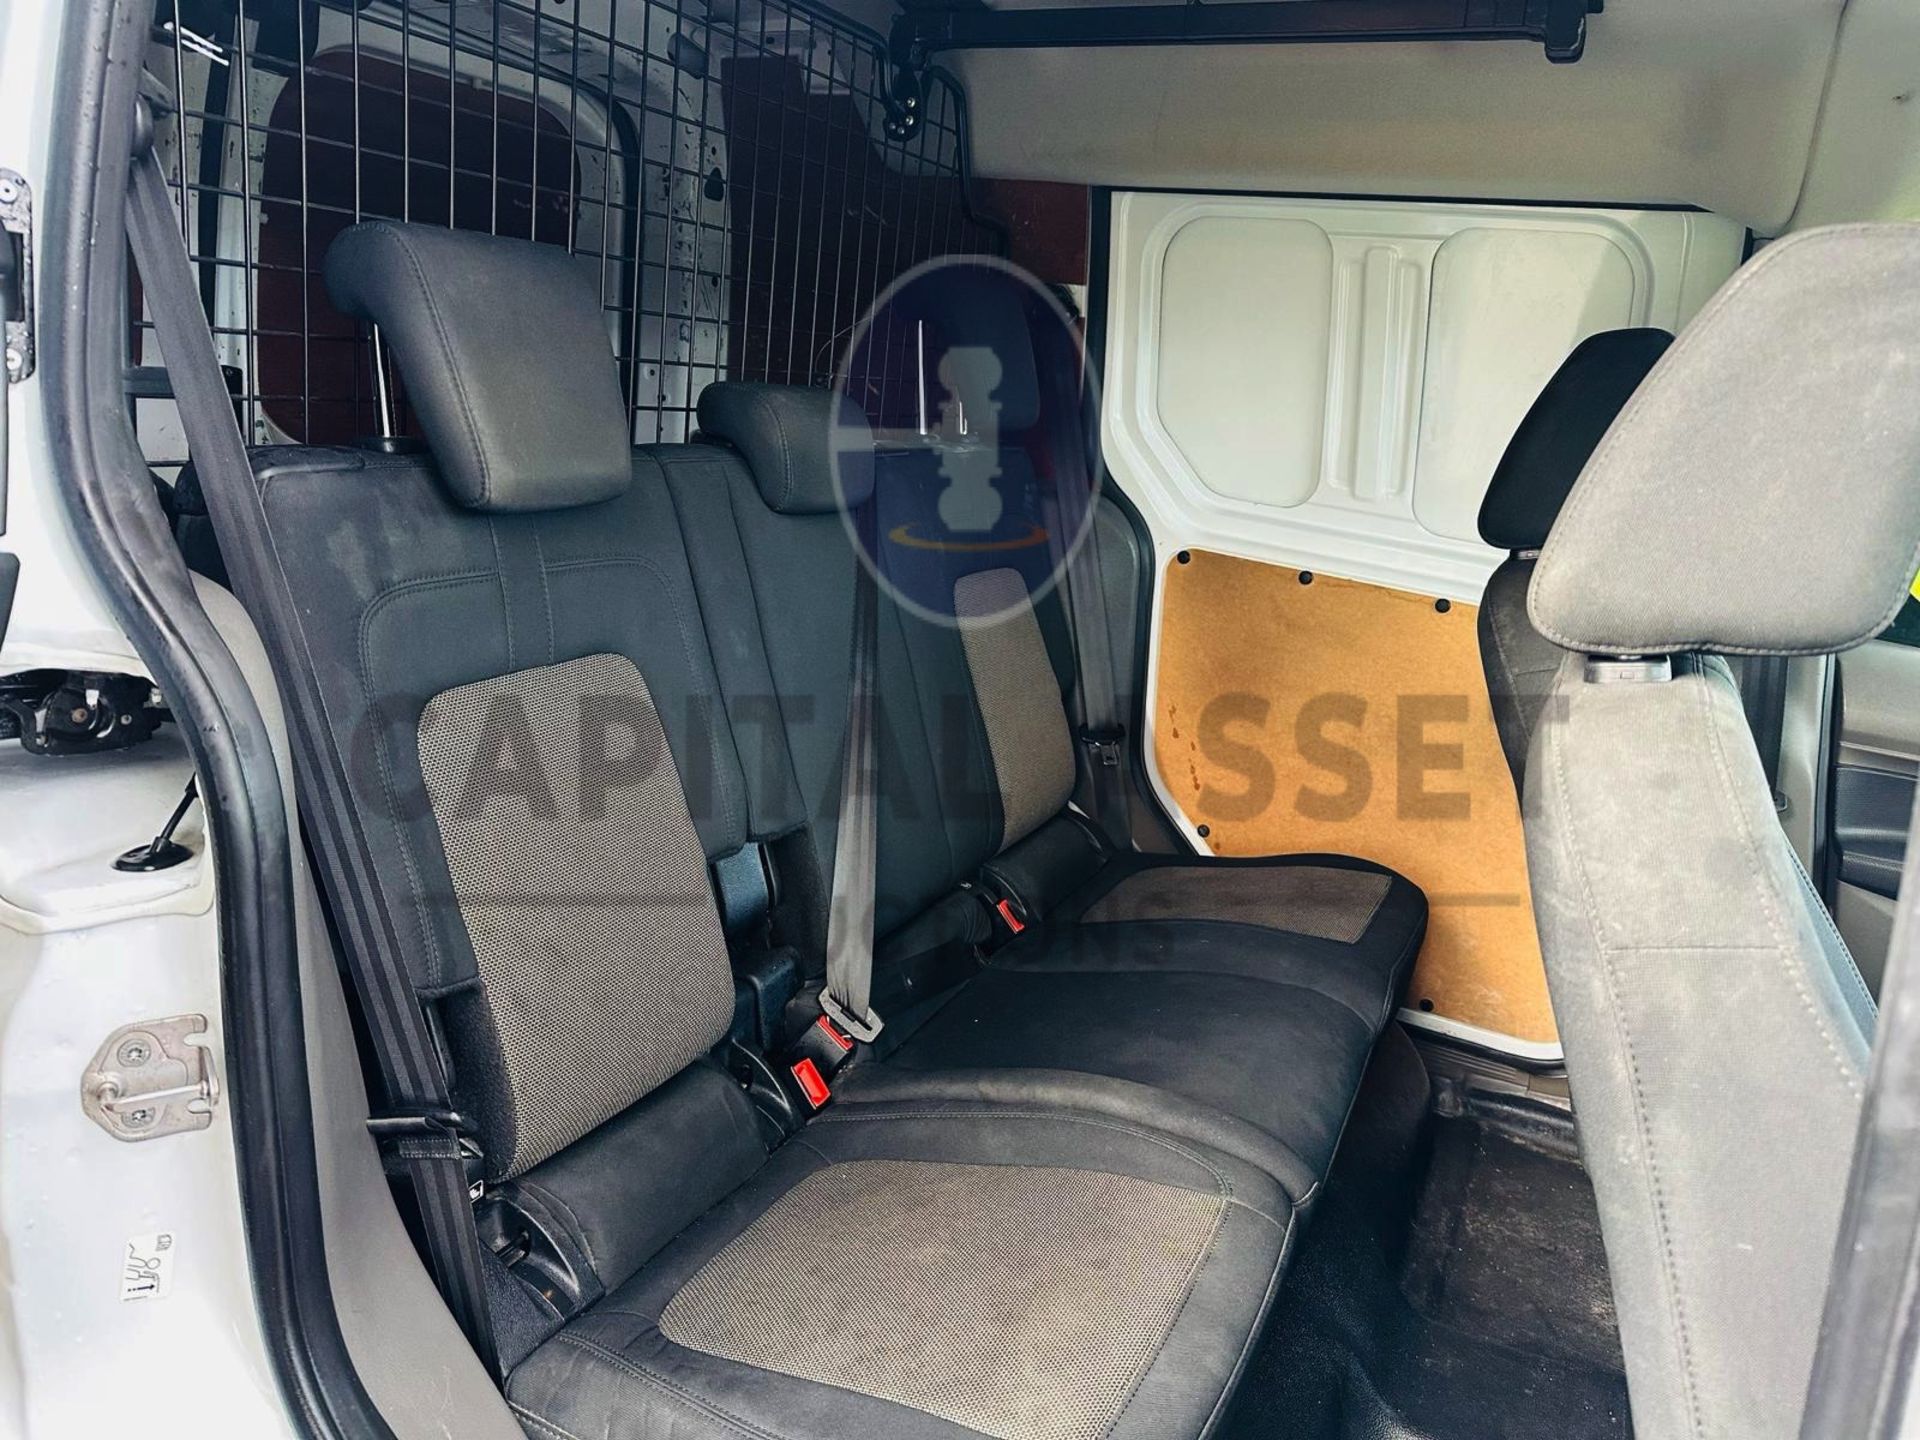 (ON SALE)FORD TRANSIT CONNECT 1.5TDI (100) 5 SEATER DUALINER / CREW VAN - EURO 6 - 2019 MODEL - - Image 23 of 25